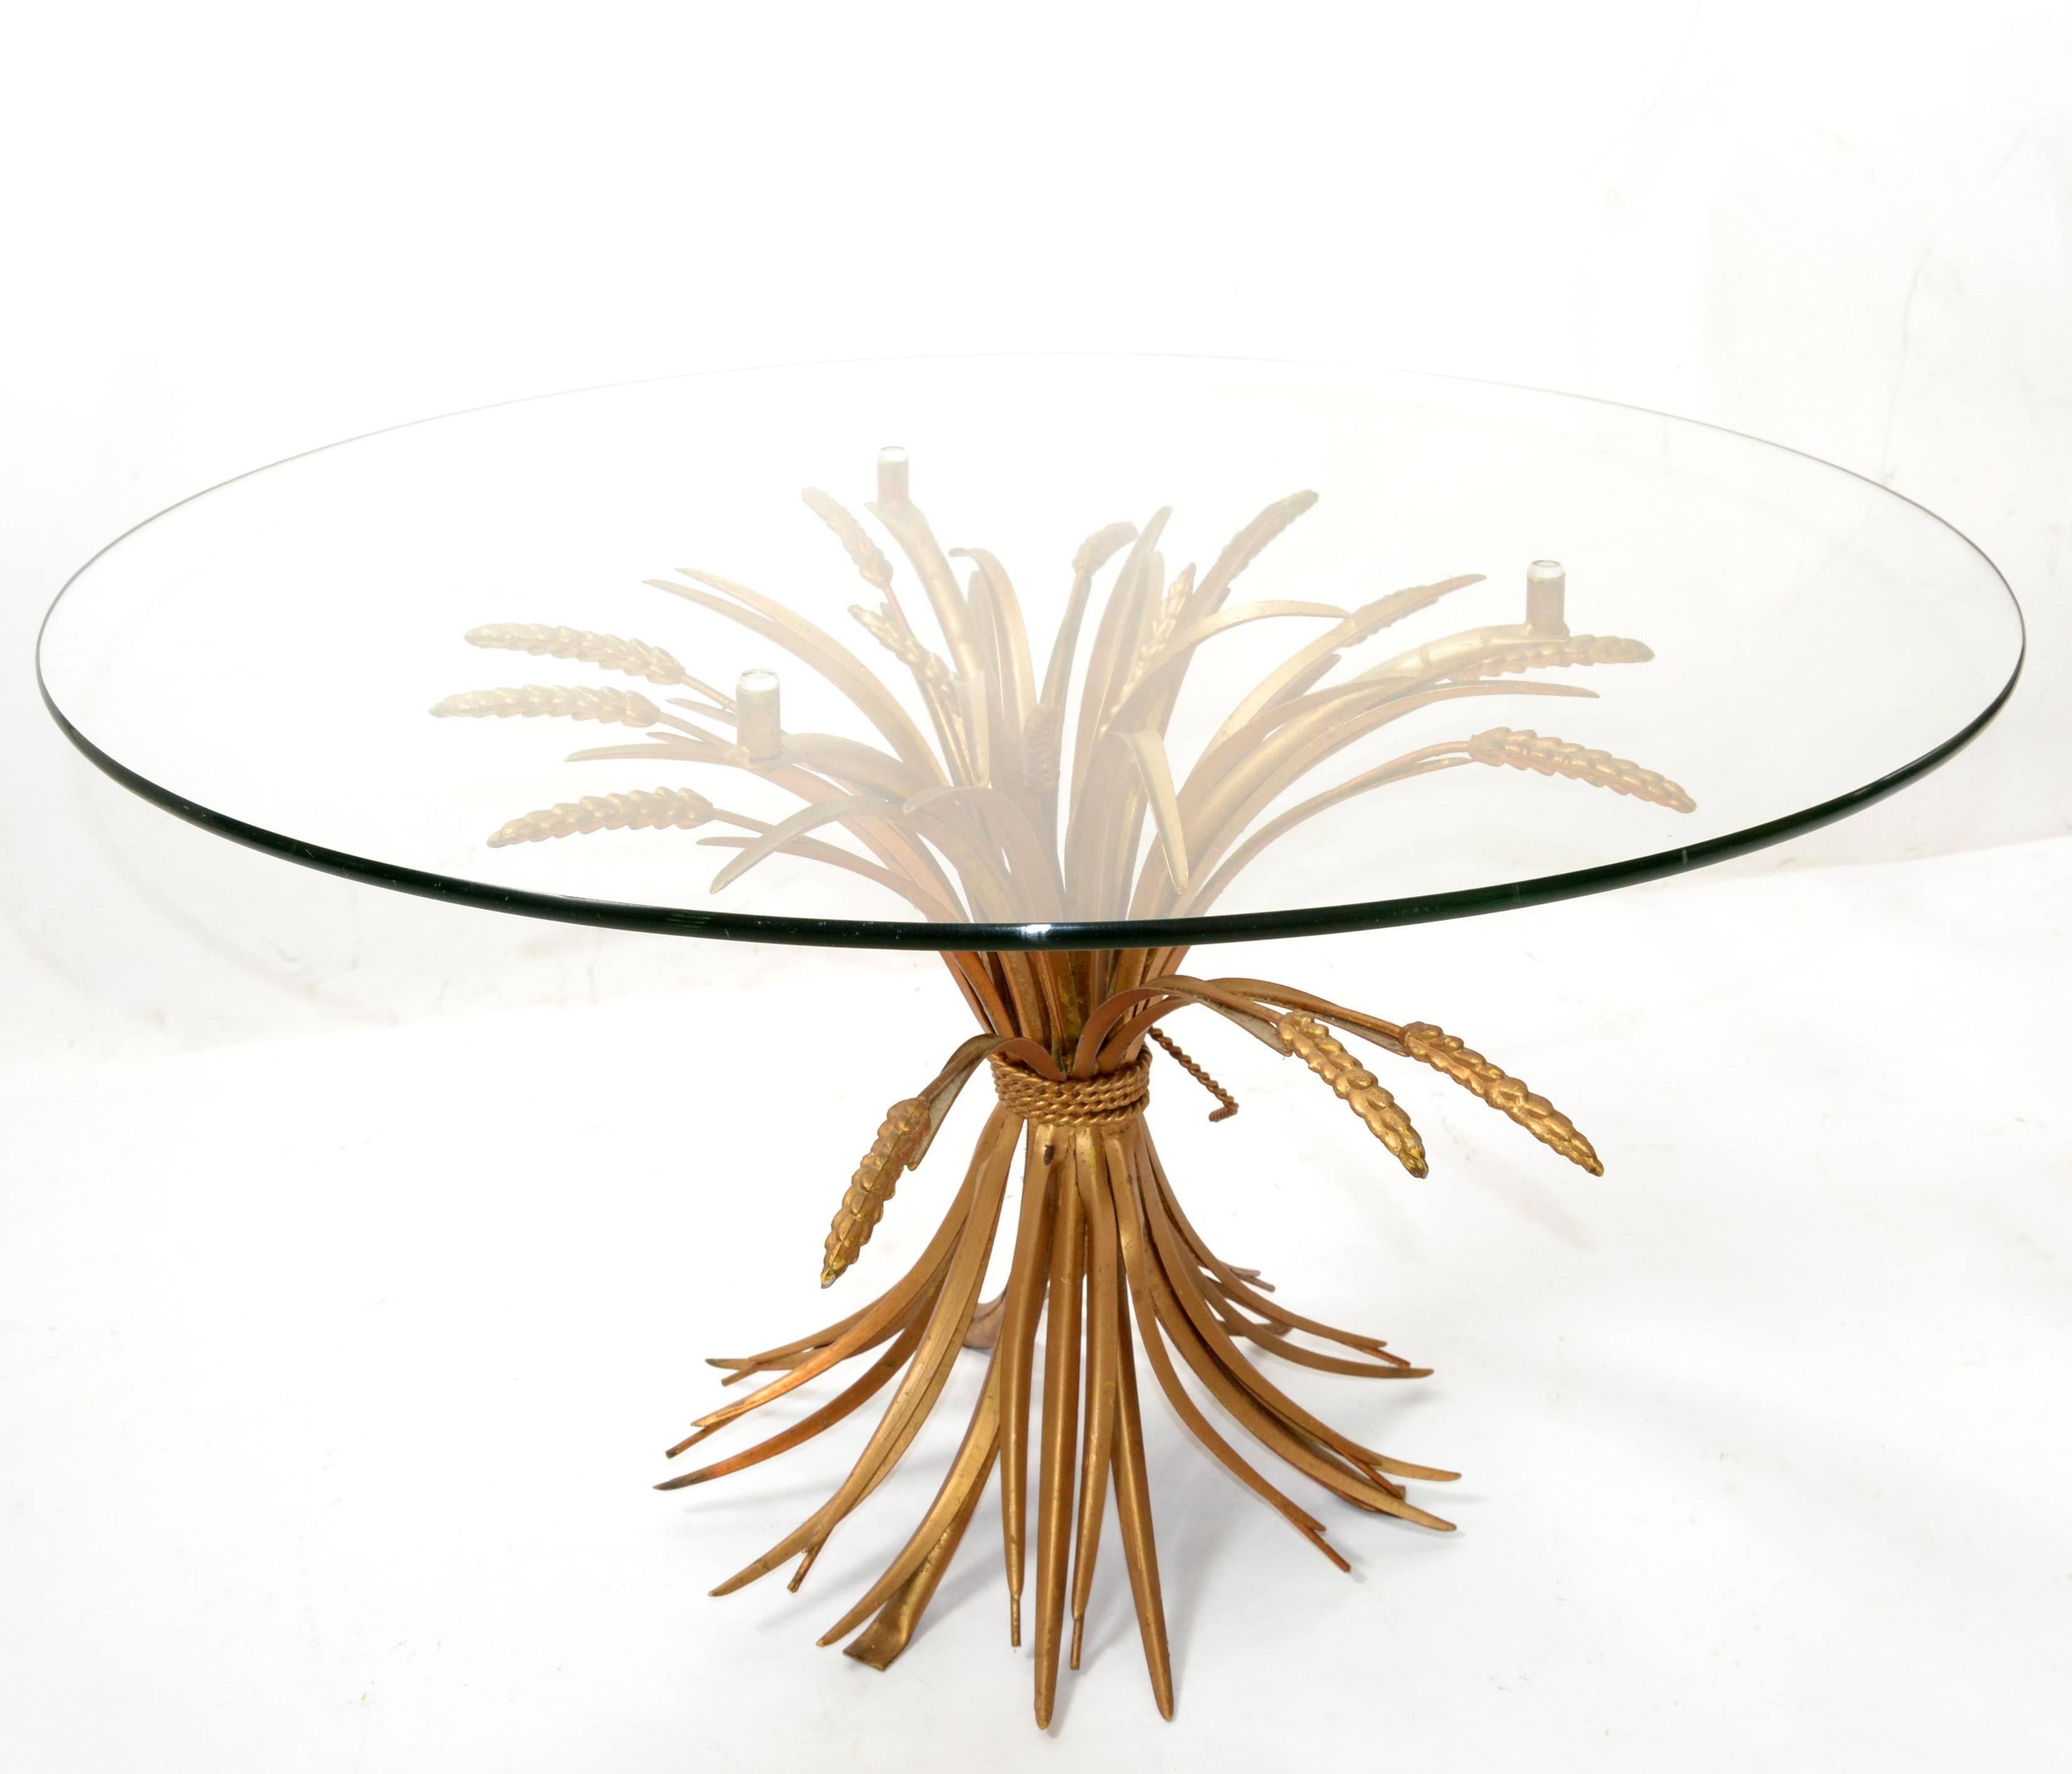 Hollywood Regency Coco Chanel style coffee table in gilt iron sheaf of wheat with glass top.
This table was made in Italy in the 1960s and shows a lot of patina.
The round glass top has been replaced. Base has age related wear. 